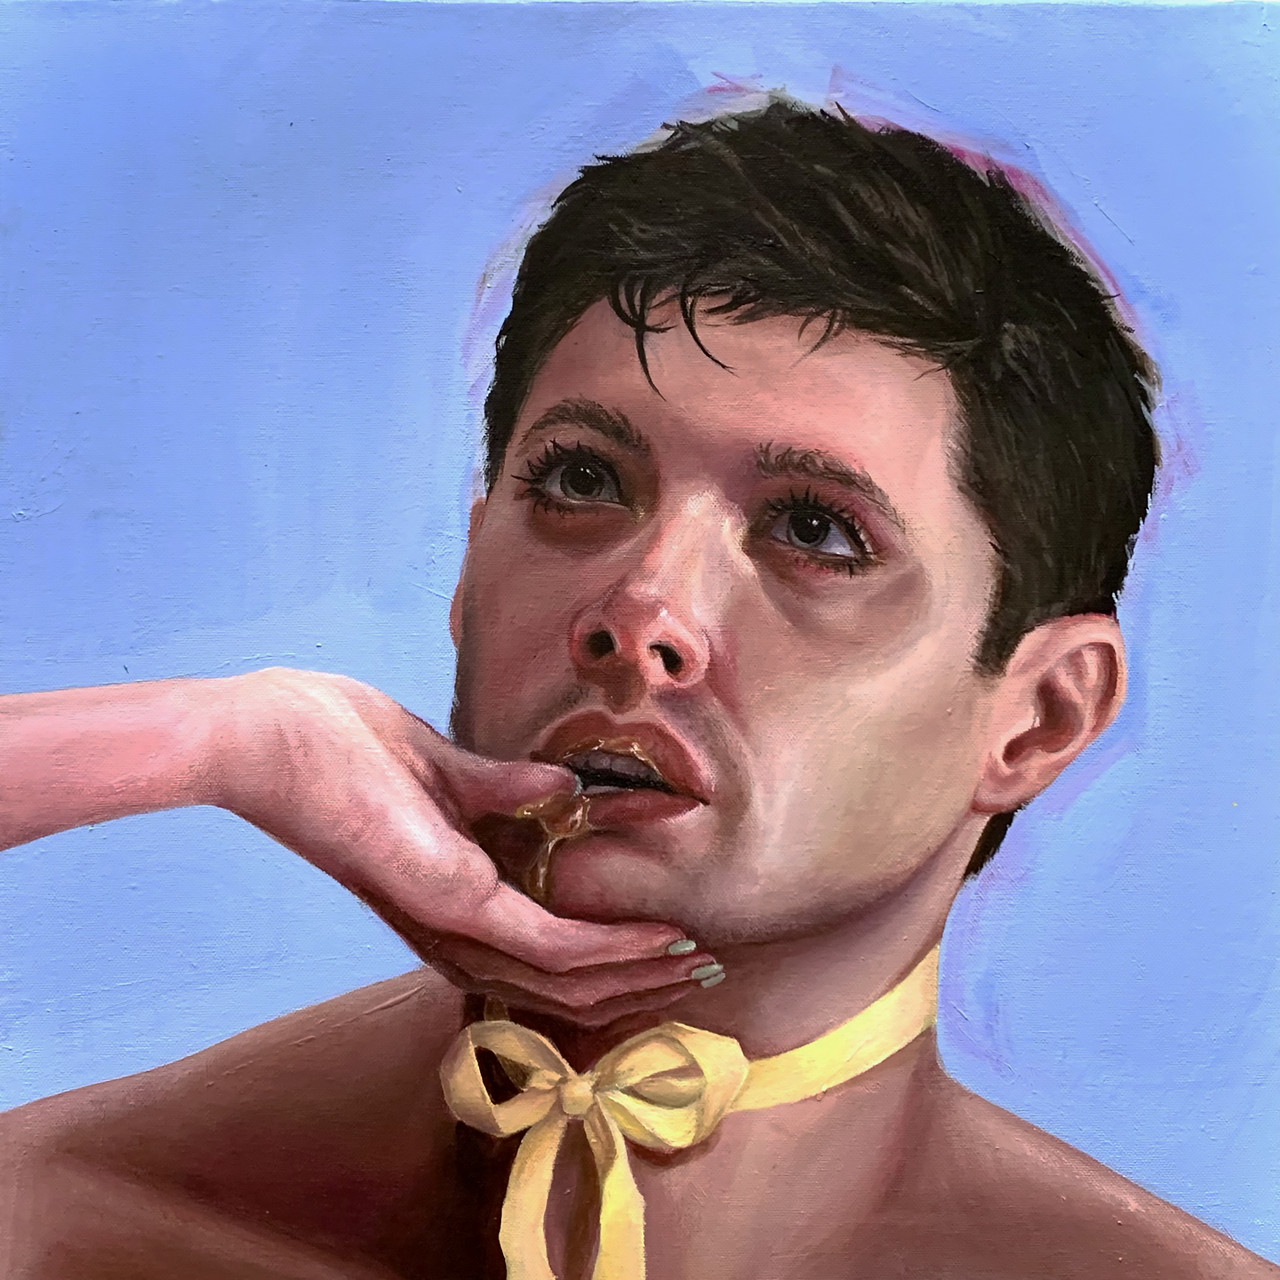 A man with a yellow bow tied around his neck looks up at an unseen woman whose thumb is in the man's mouth, dripping with golden liquid